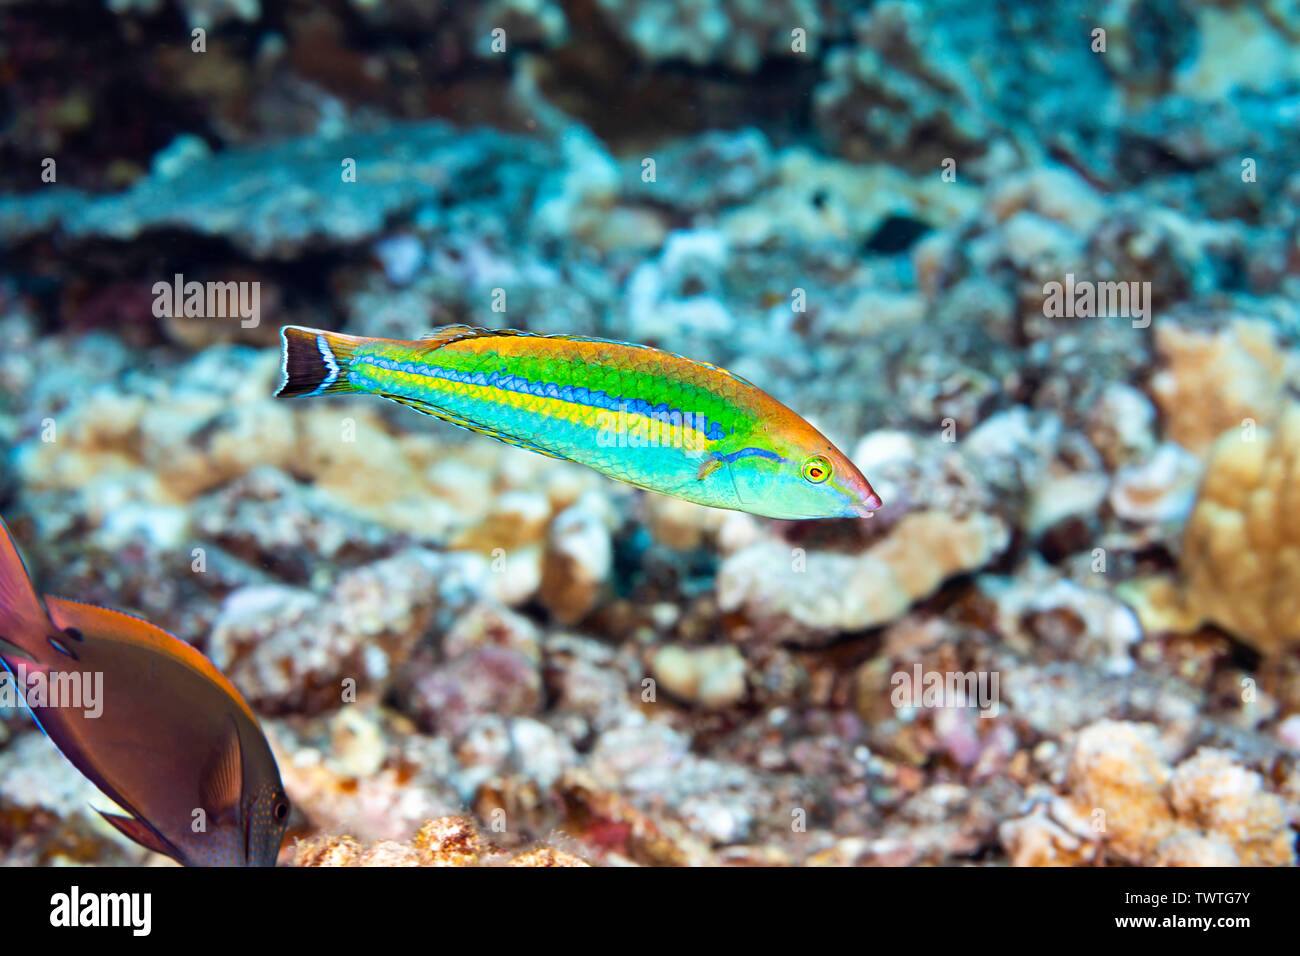 Male smalltail wrasse, Pseudojuloides cerasinus, is also called a pencil wrasse and reaches almost 5 inches in length, Hawaii, USA. Stock Photo